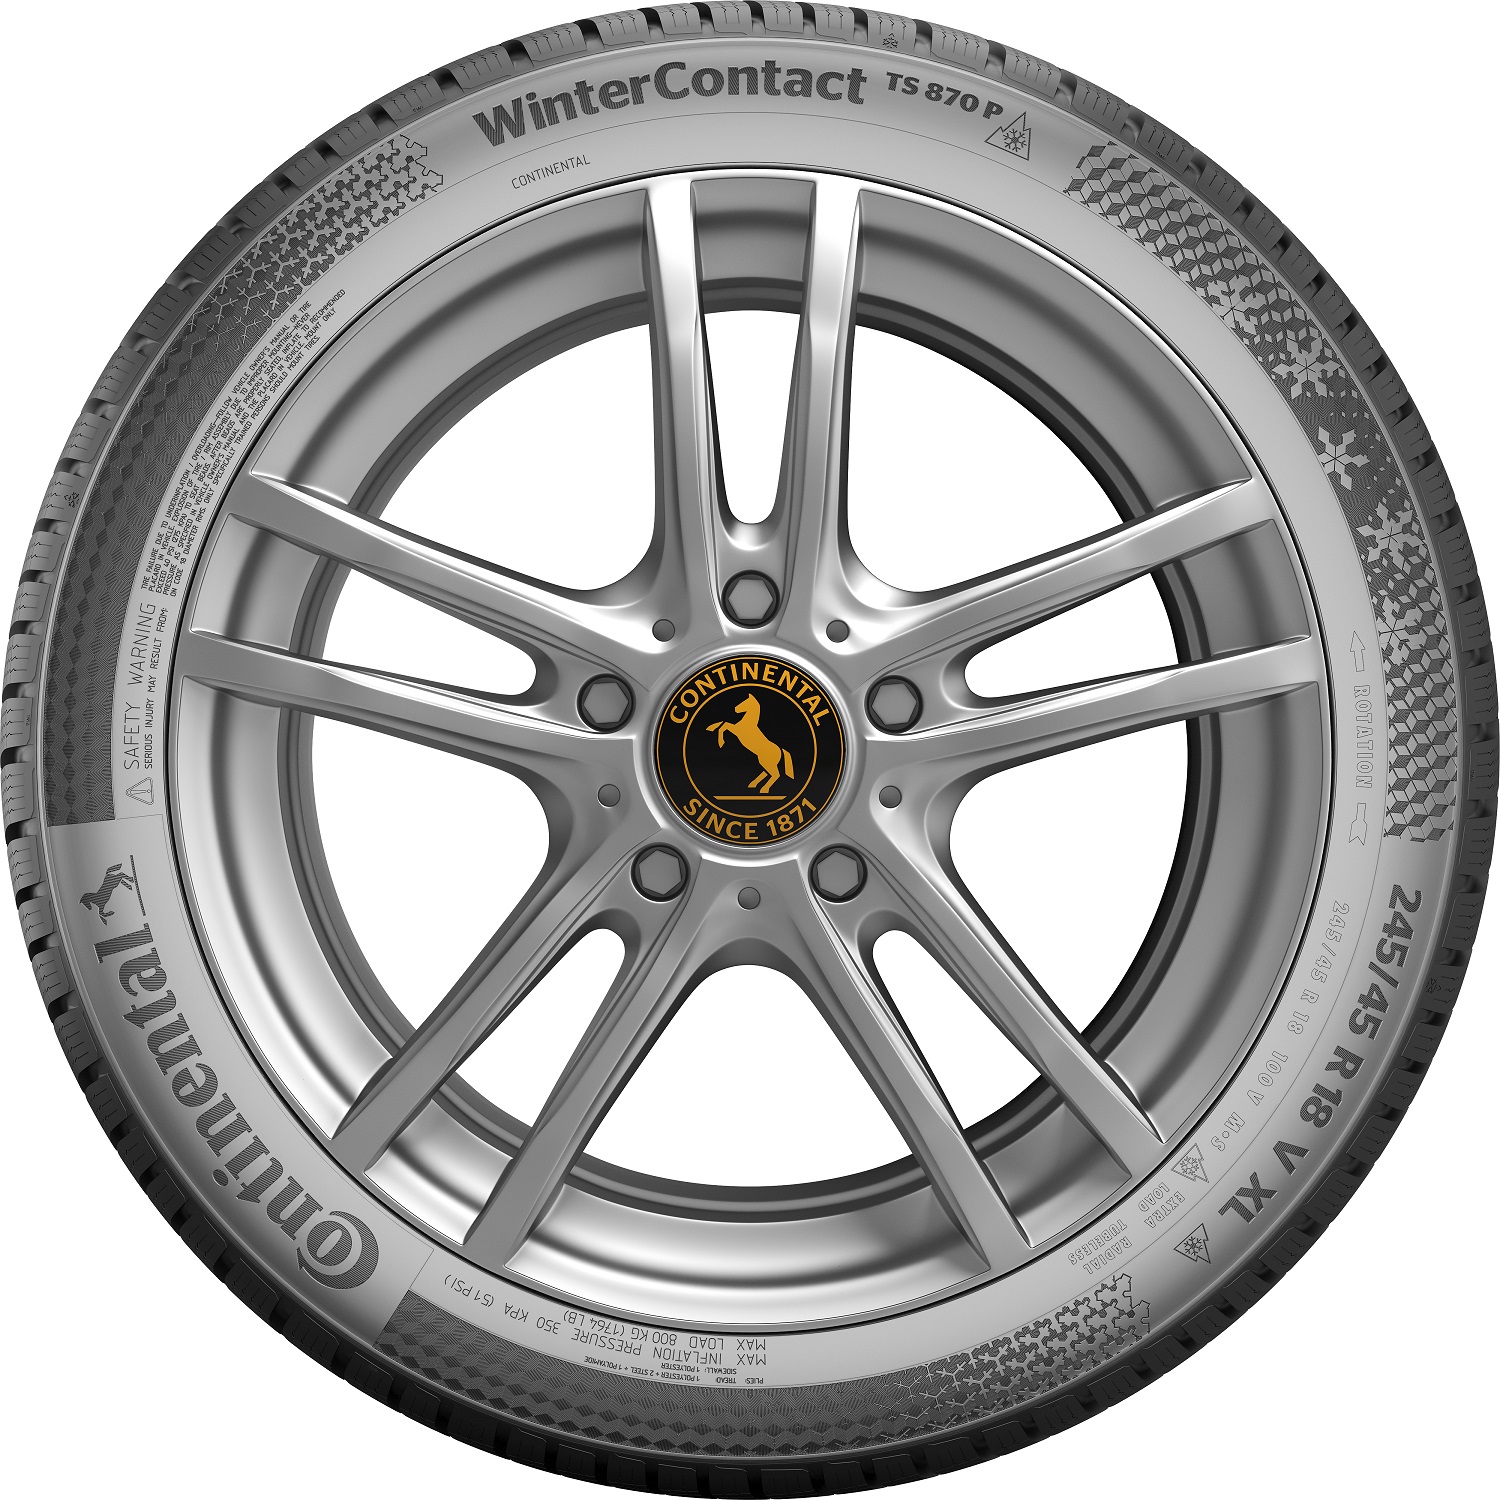 1632896972-continental-wintercontact-ts-870-p-productpicture-90.jpg